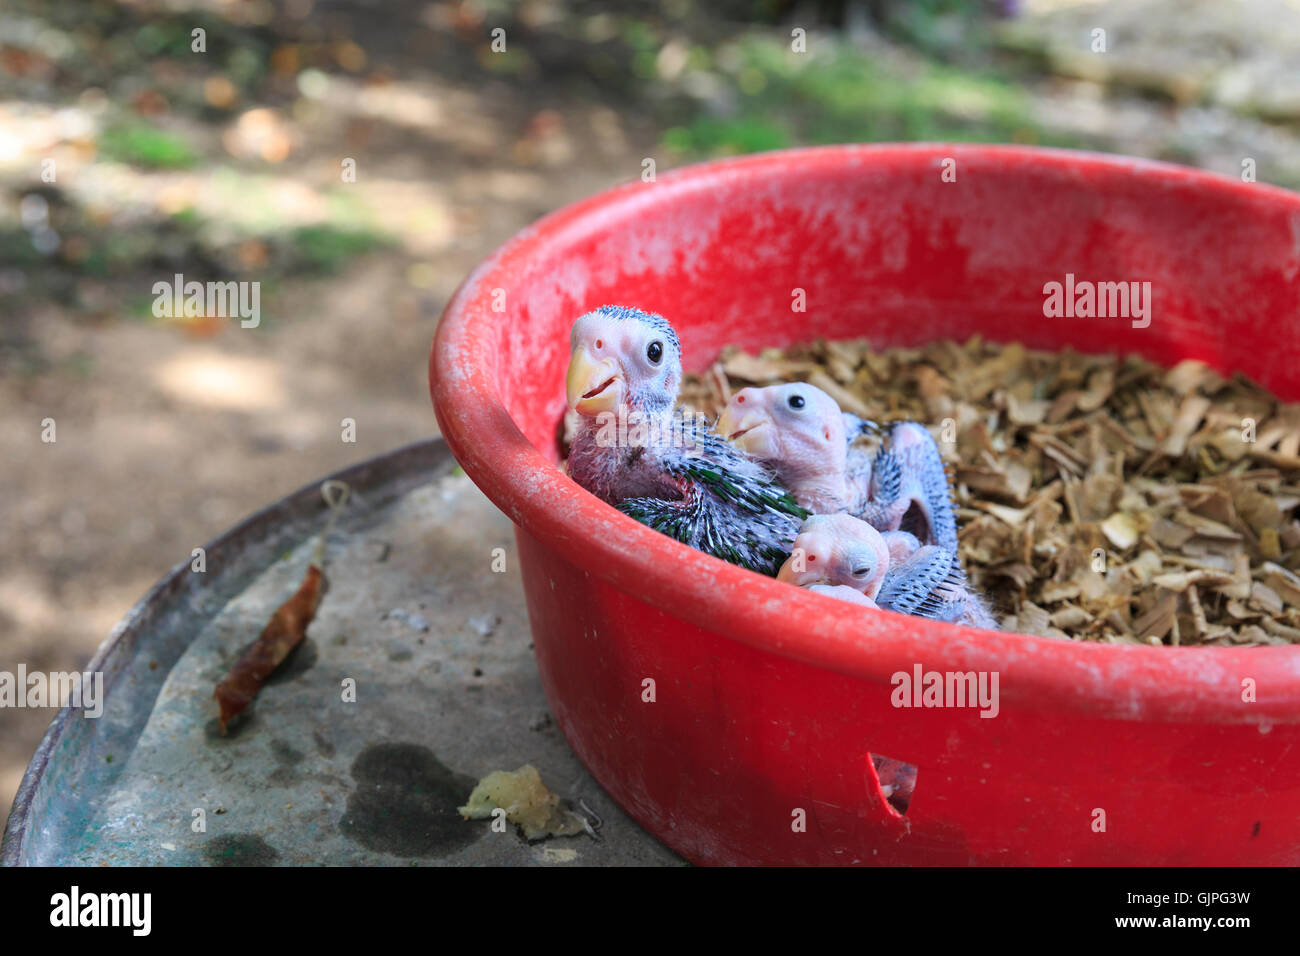 Group of tropical baby parrots in a nesting box, being hand reared, rural Cuba Stock Photo